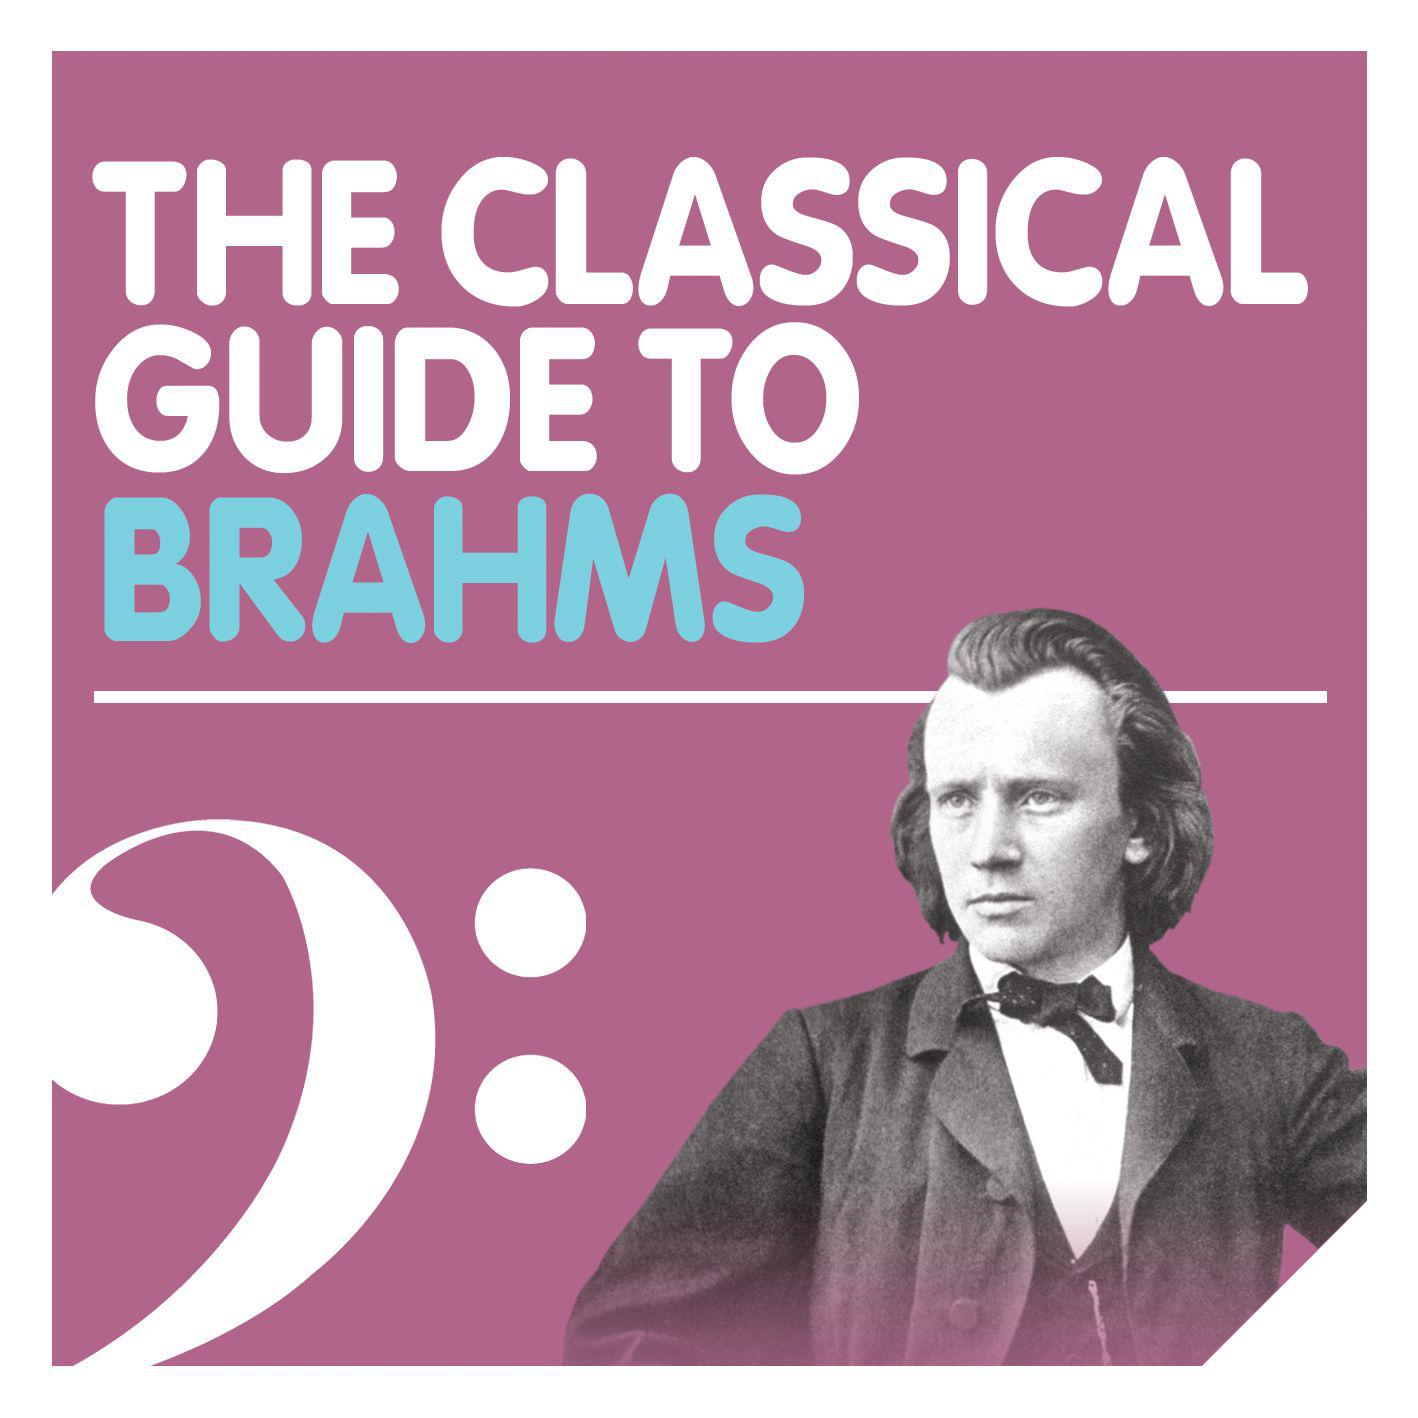 The Classical Guide to Brahms